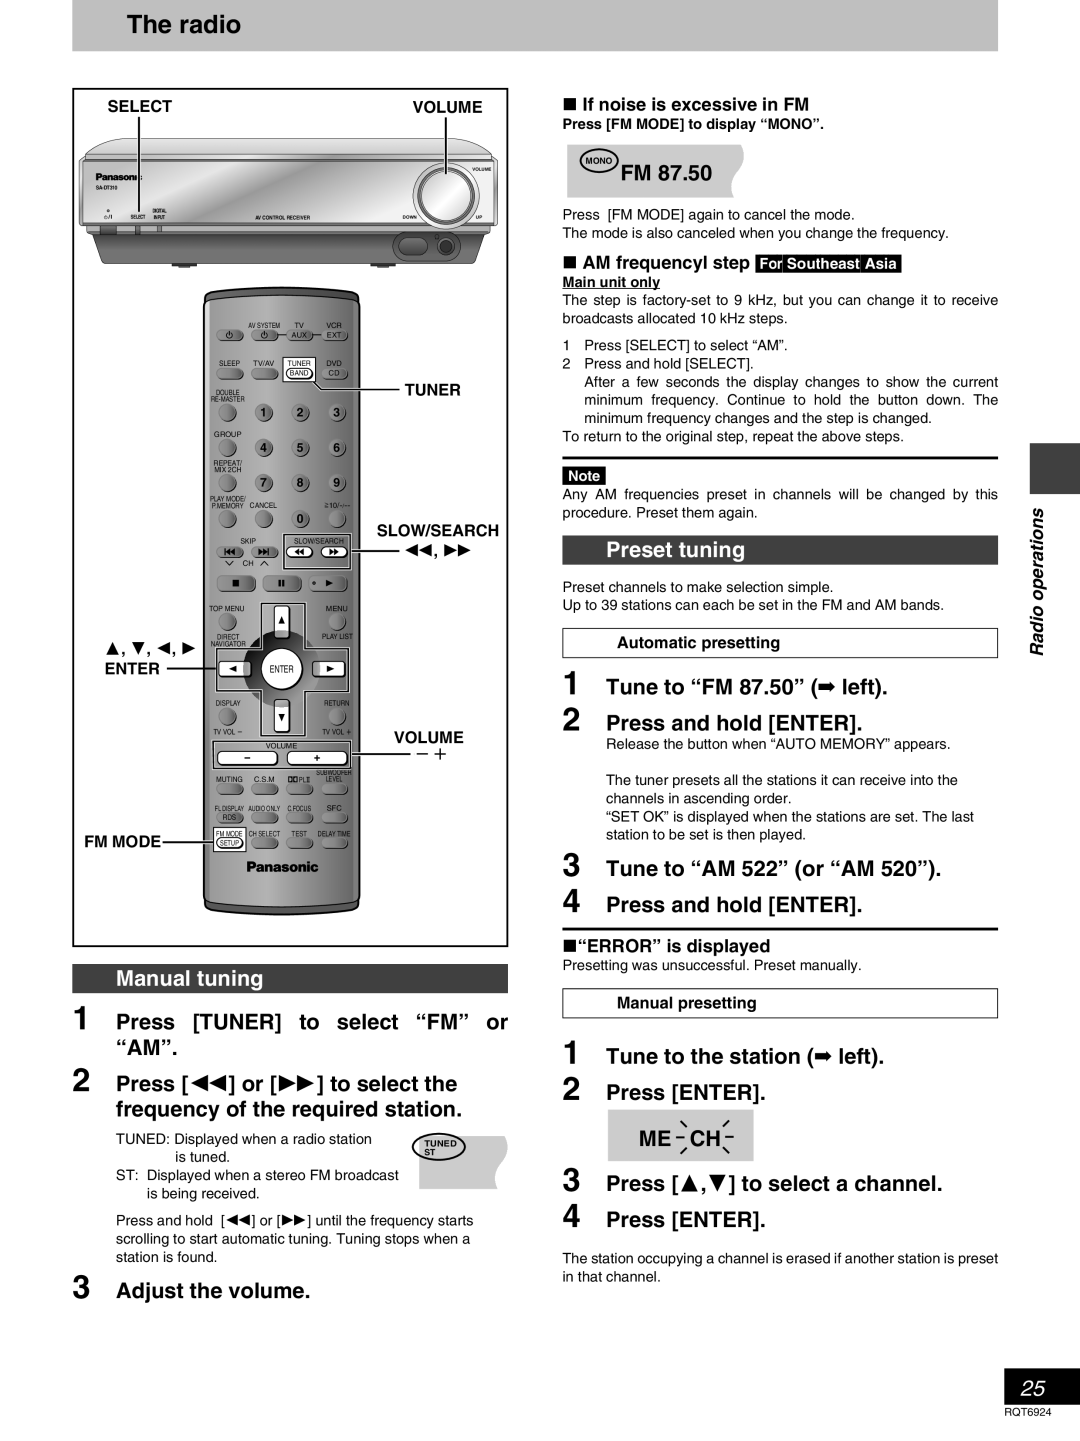 Panasonic SC-DT310 manual The radio, Manual tuning, 1Press TUNER to select “FM” or “AM”, 3Adjust the volume, Preset tuning 